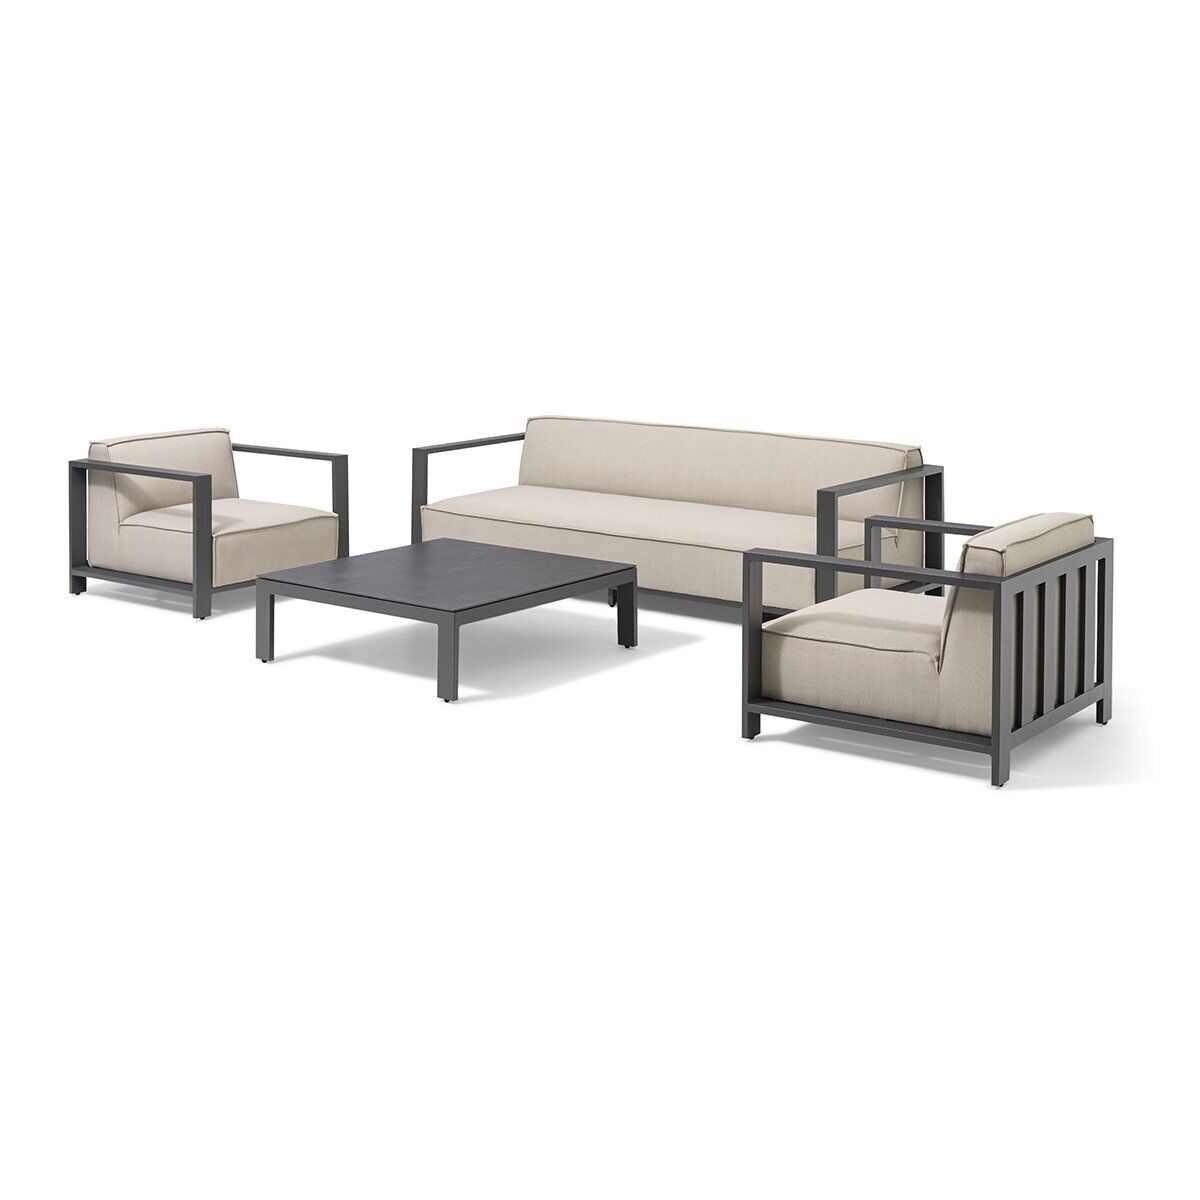 Maze Ibiza 3 Seat Sofa Set With Square Coffee Table From Side No Background-Better Bed Company